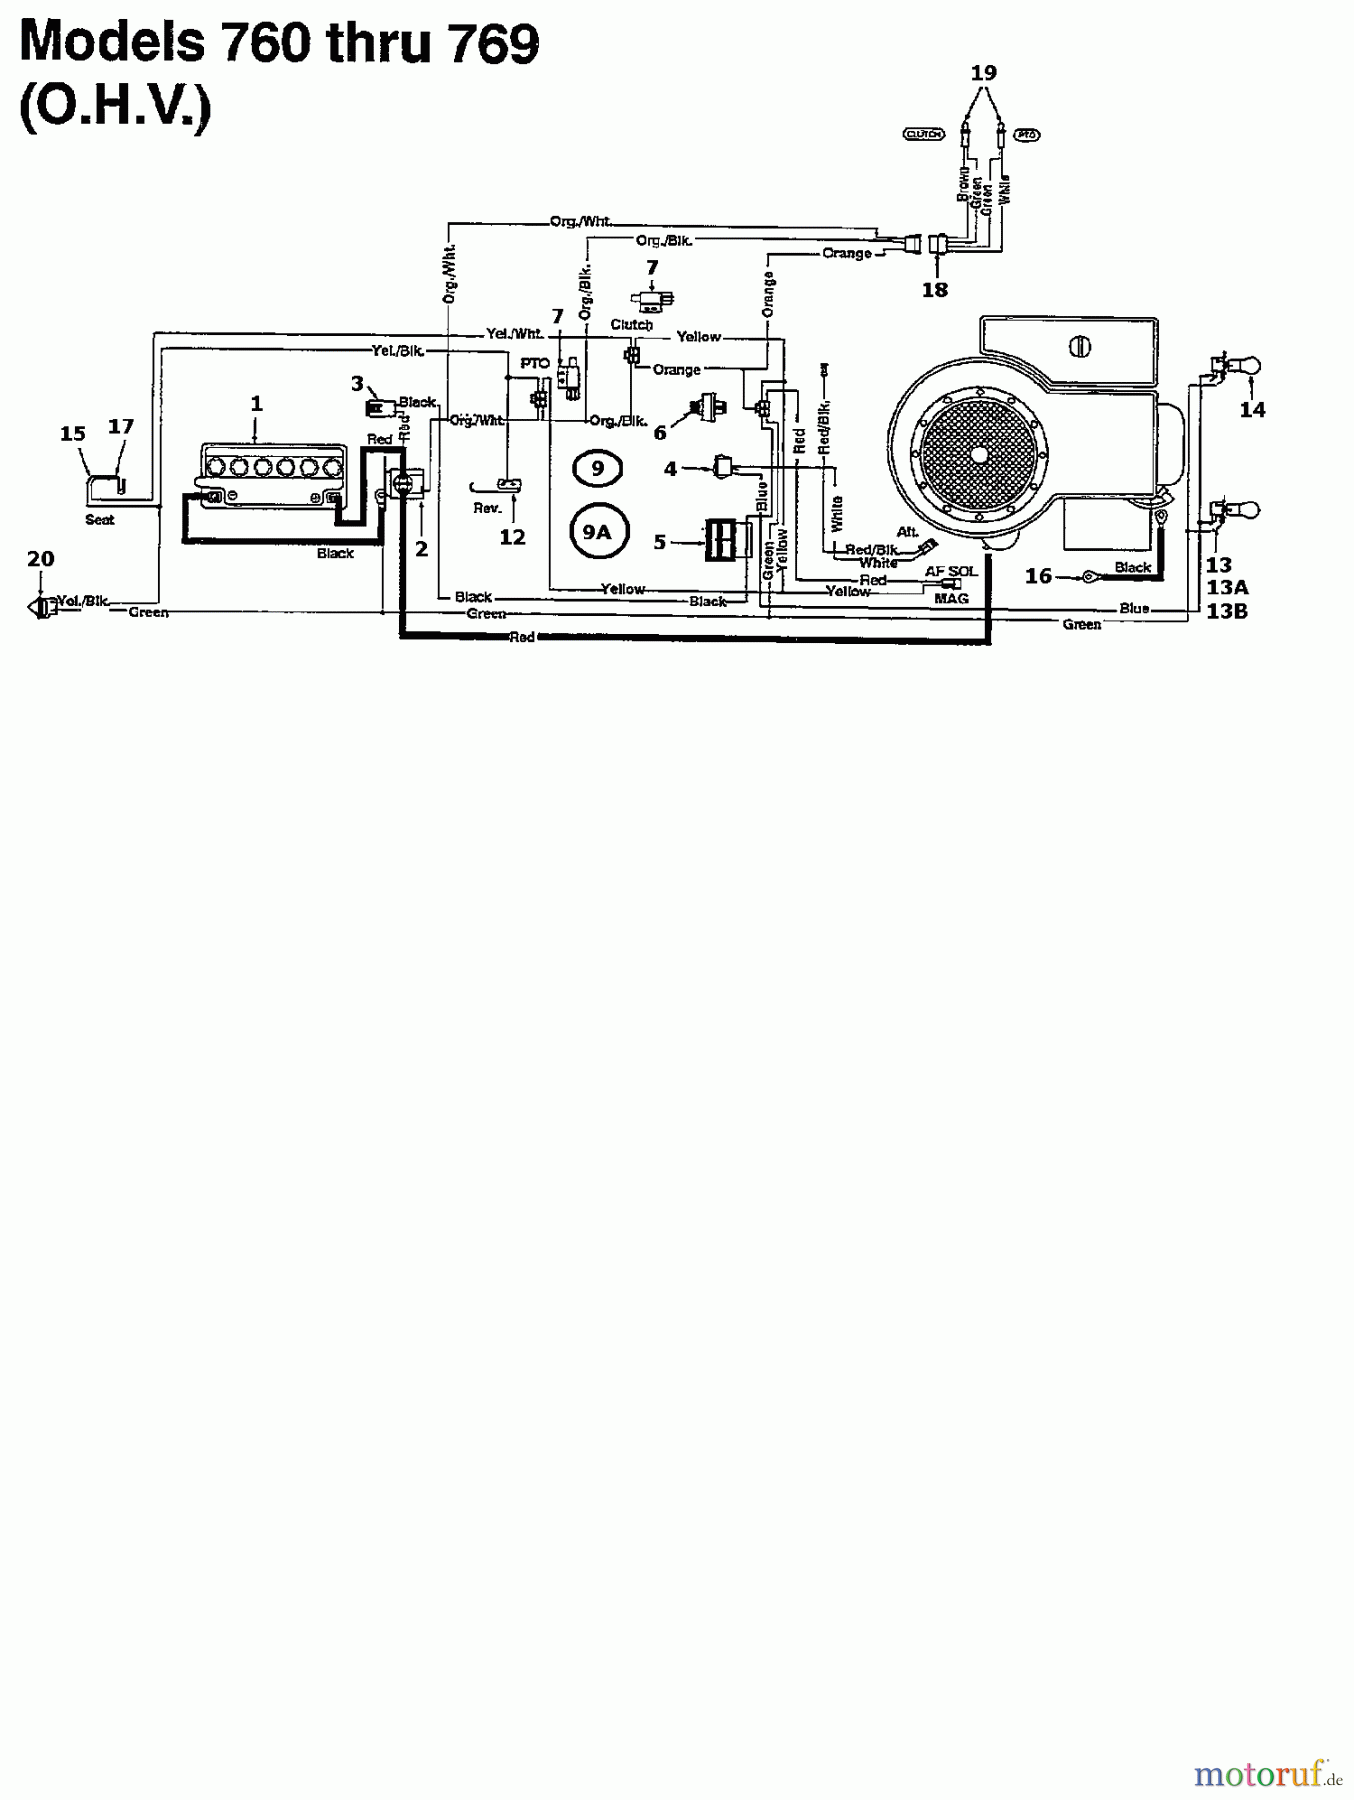  Gutbrod Lawn tractors Sprint 3000 04200.02  (1995) Wiring diagram for O.H.V.